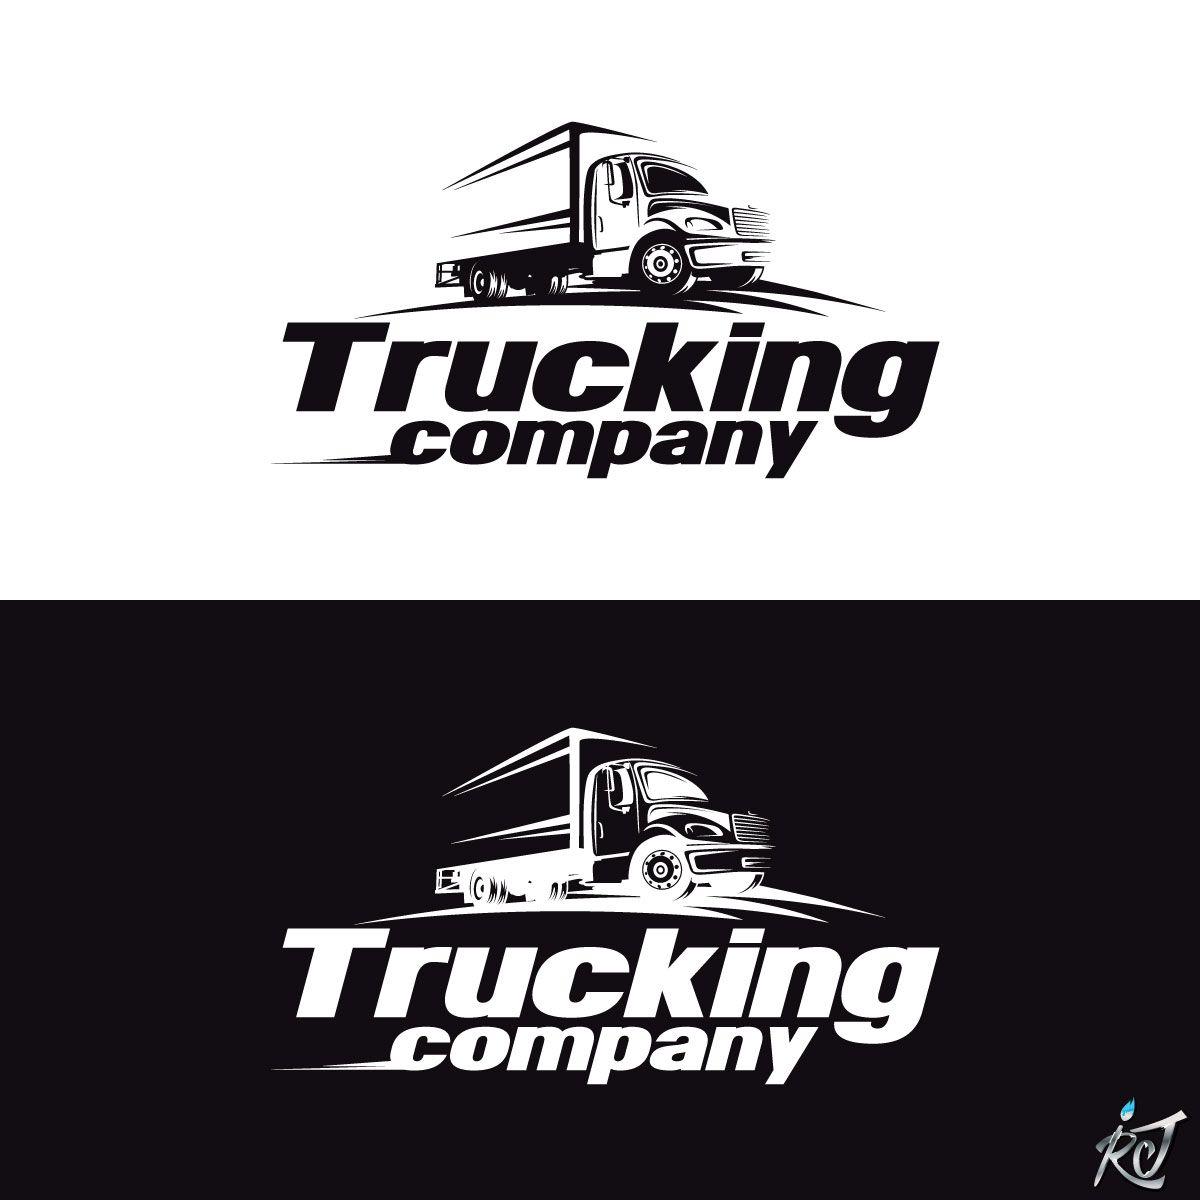 R R Trucking Logo - Bold, Serious, Trucking Company Logo Design for Open To all ideas